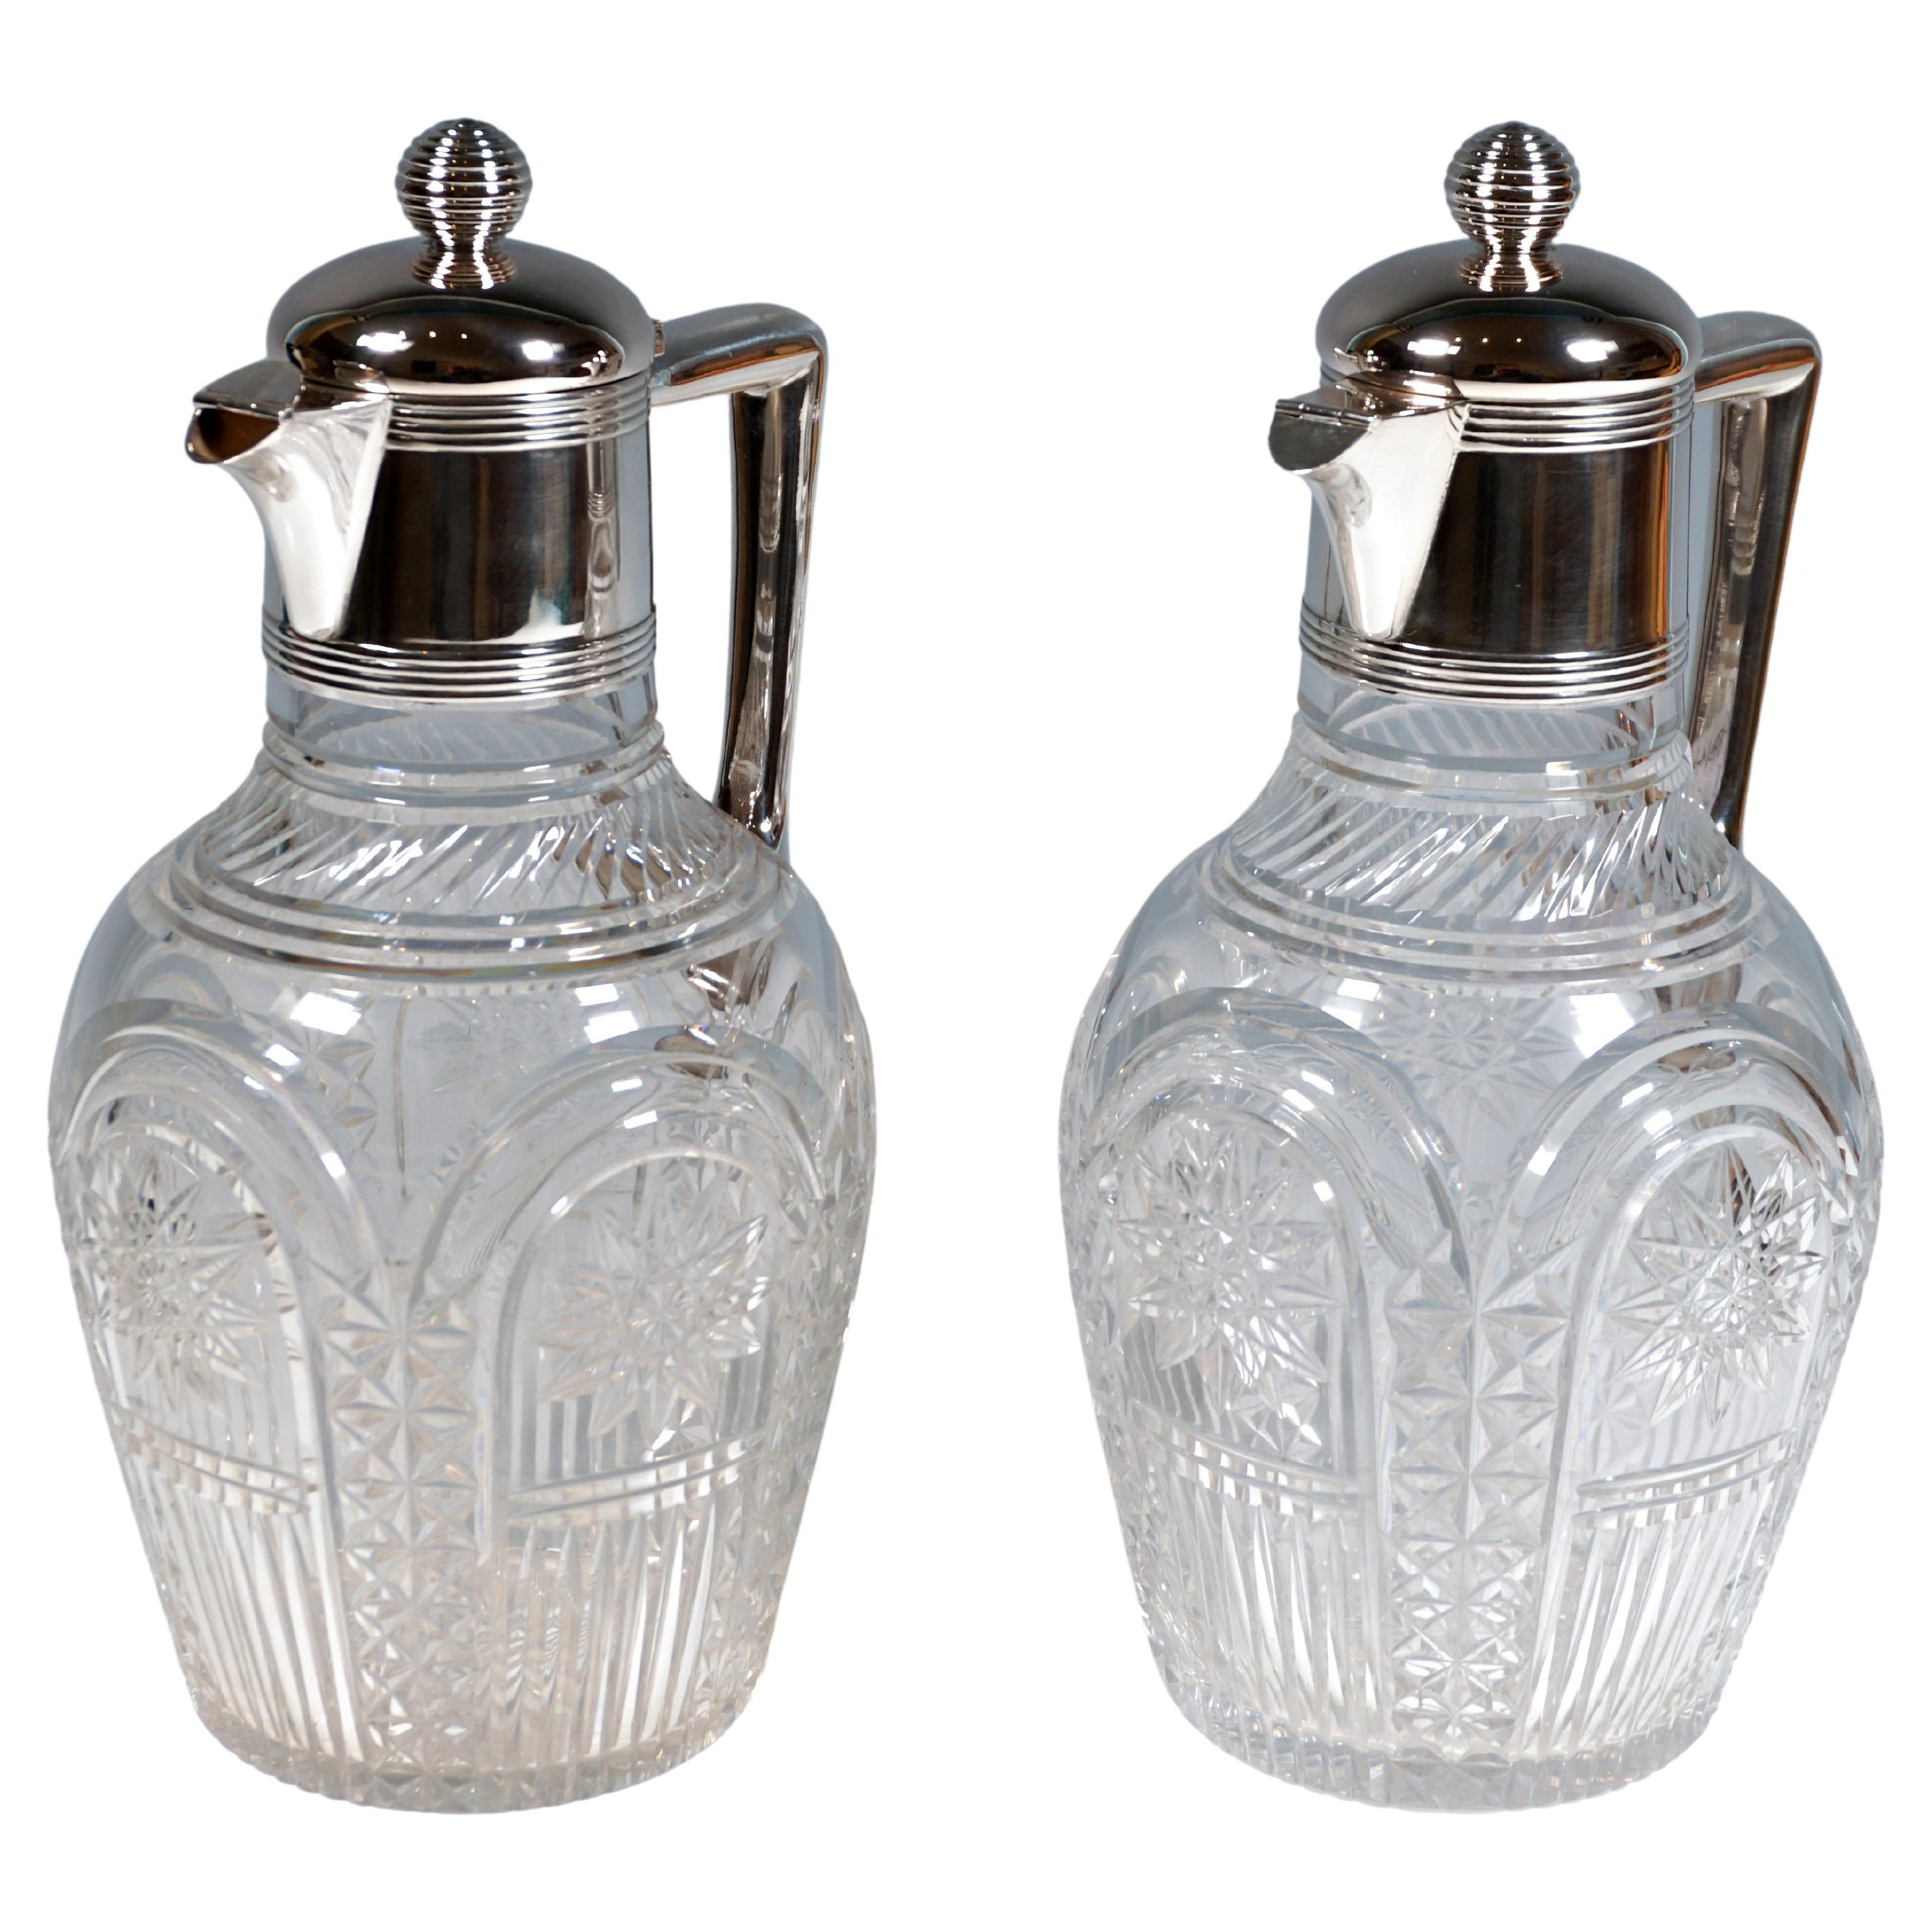 Pair of Art Nouveau Glass Carafes with Silver Mounts, Koch & Bergfeld, Germany